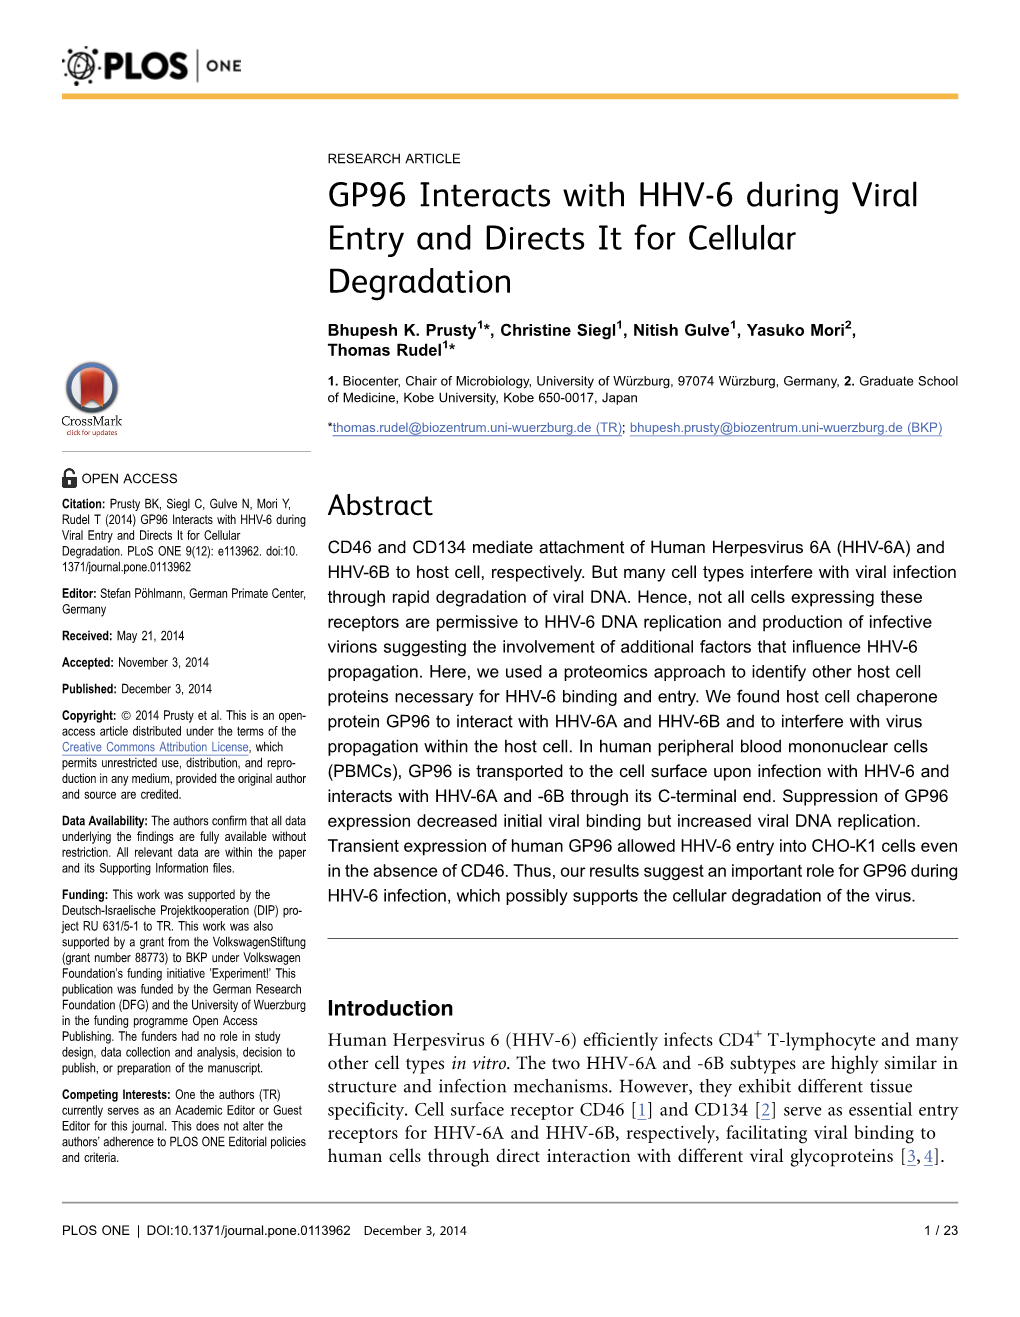 GP96 Interacts with HHV-6 During Viral Entry and Directs It for Cellular Degradation